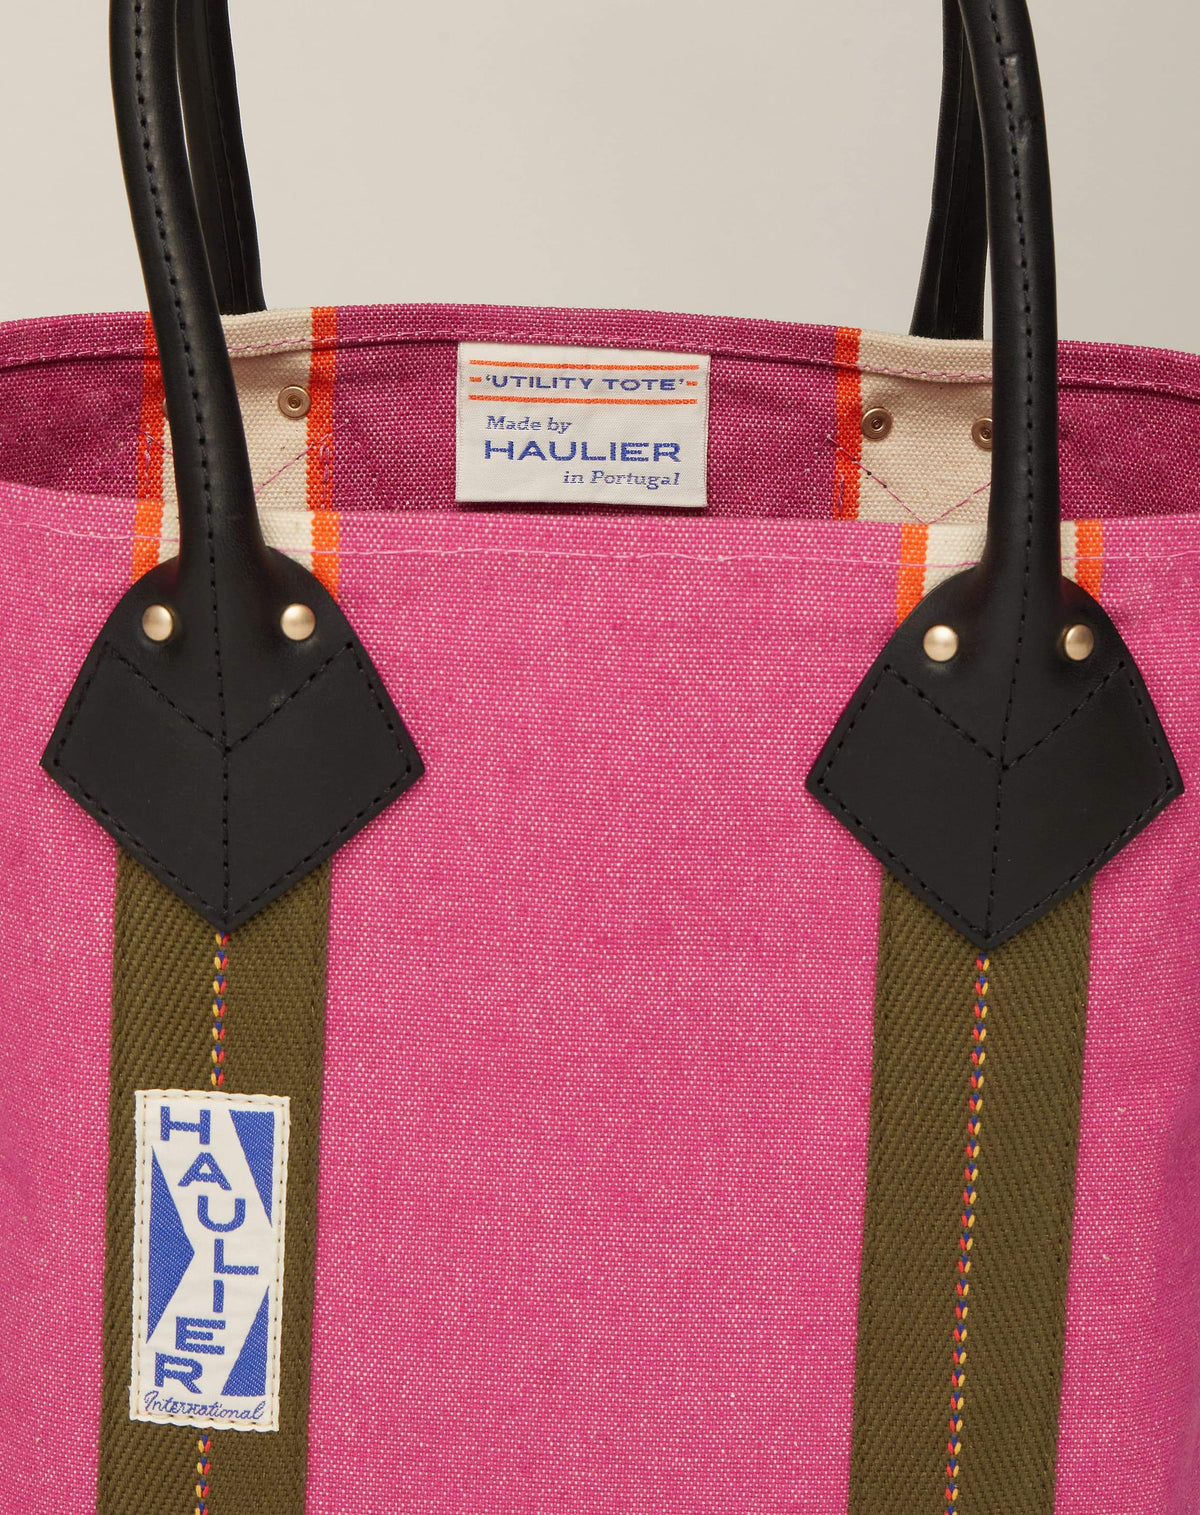 Close-up image of small classic canvas tote bag in fuchsia colour with black leather handles and contrasting stripes and HAULIER branding.